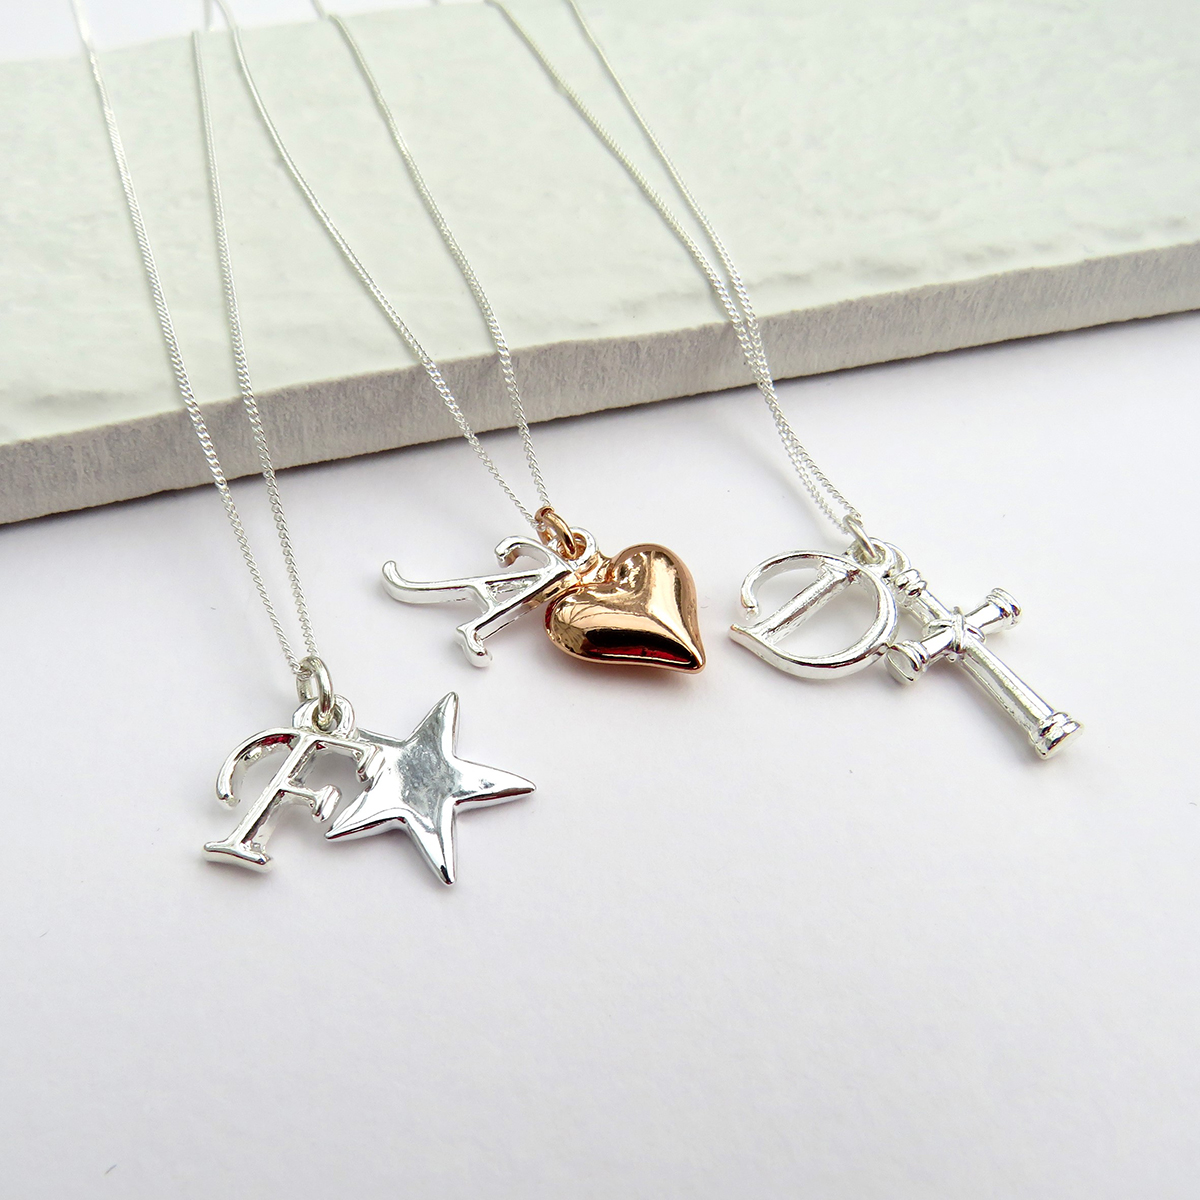 Personalised Charm Necklace - Any Initial